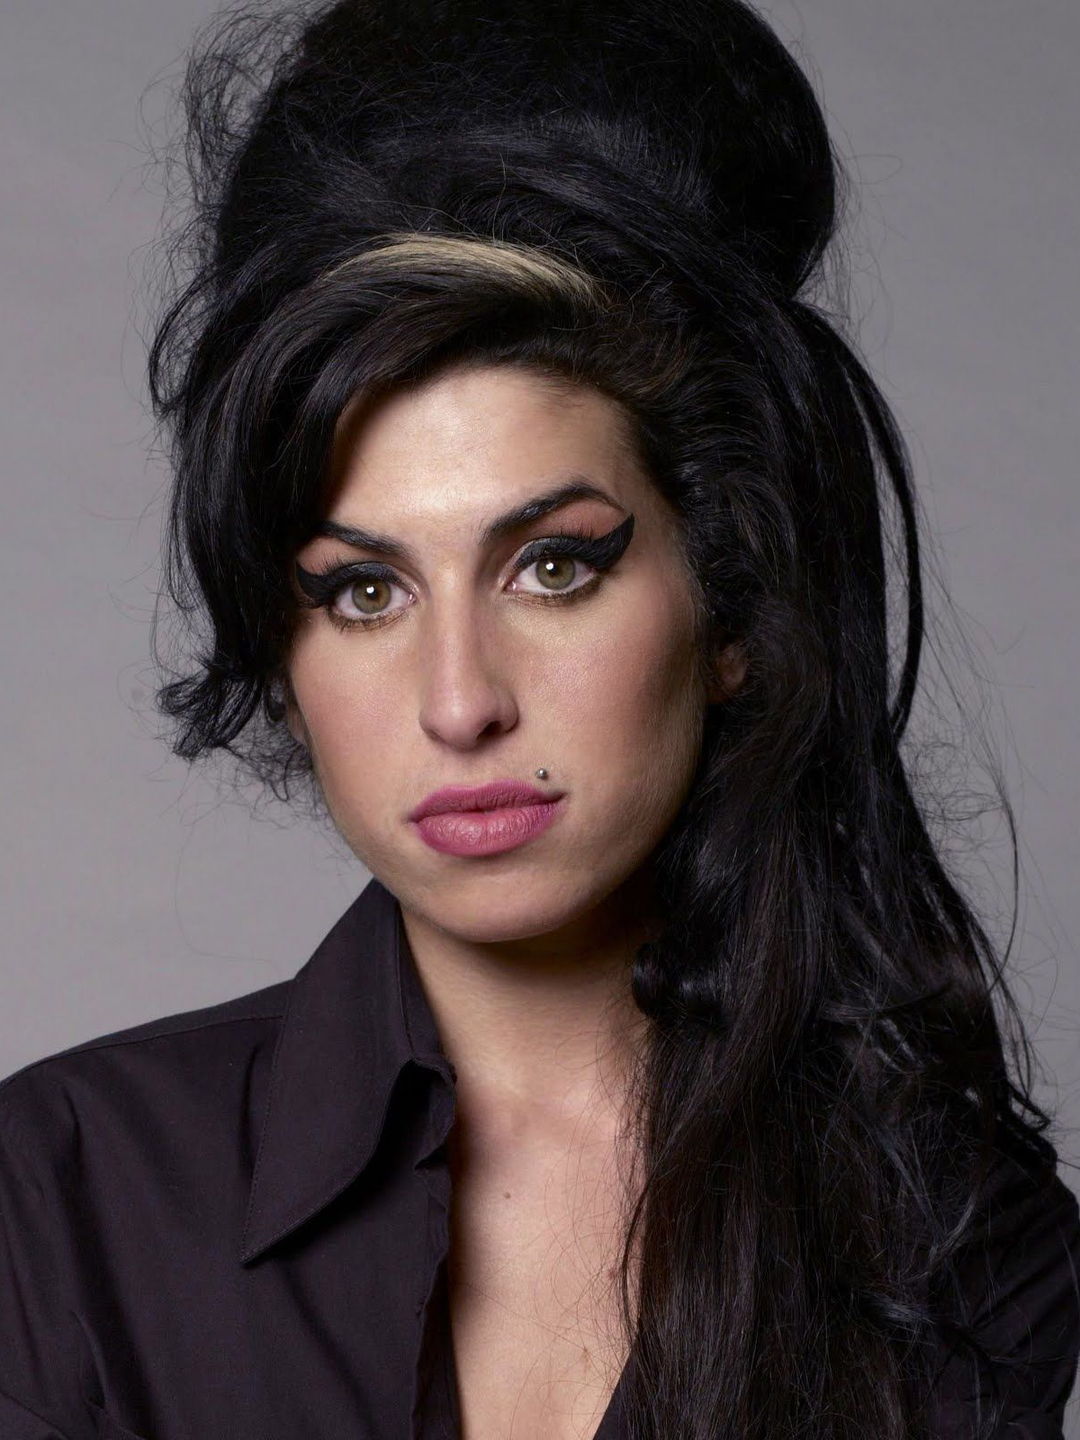 Amy Winehouse who is her mother